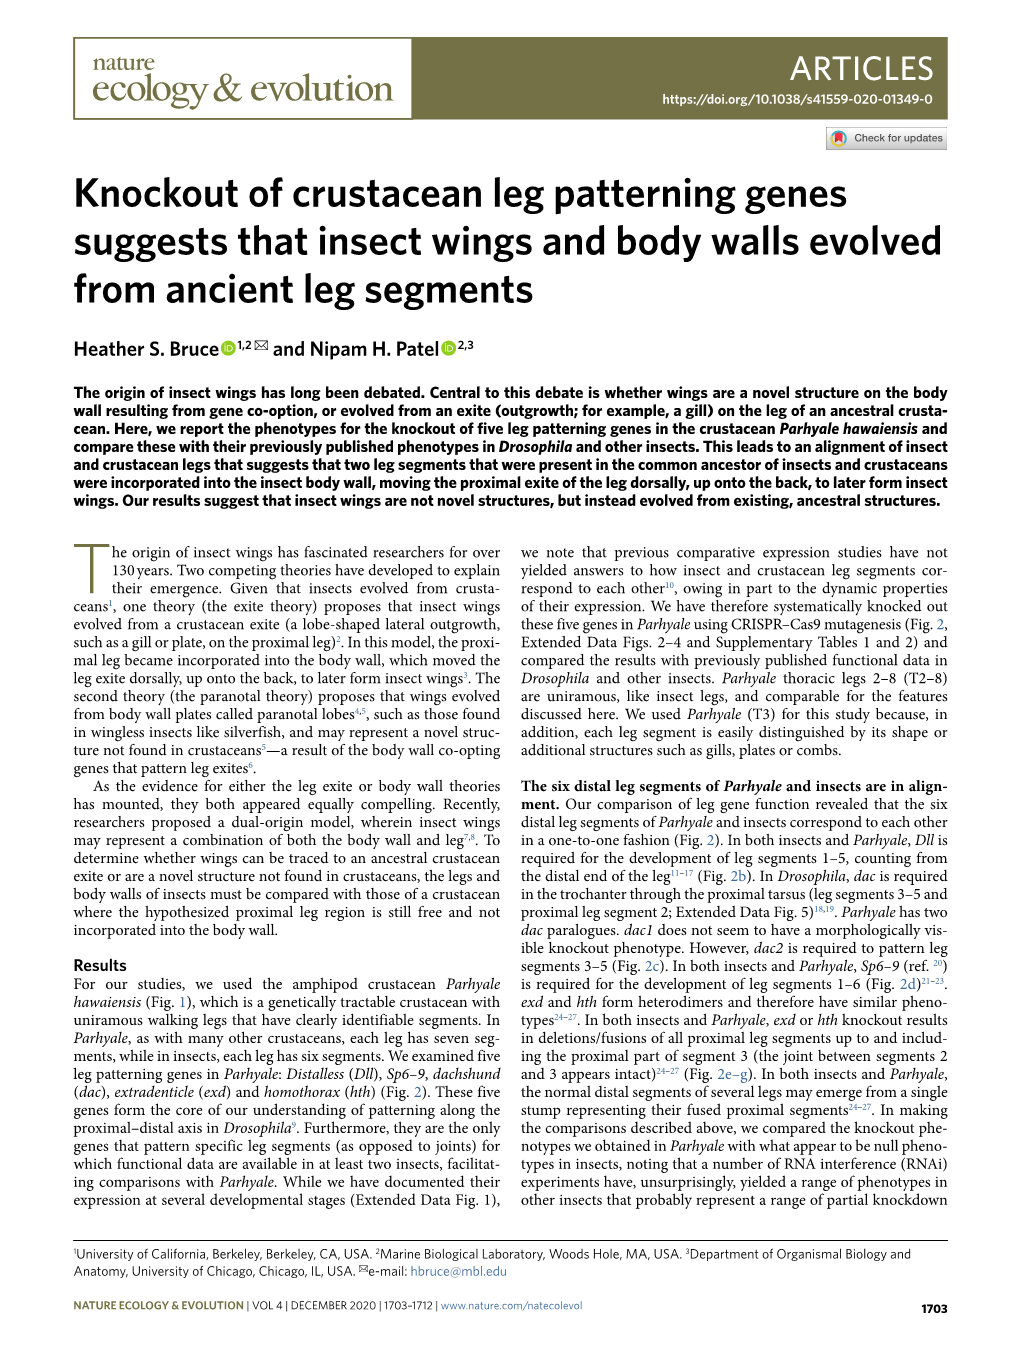 Knockout of Crustacean Leg Patterning Genes Suggests That Insect Wings and Body Walls Evolved from Ancient Leg Segments